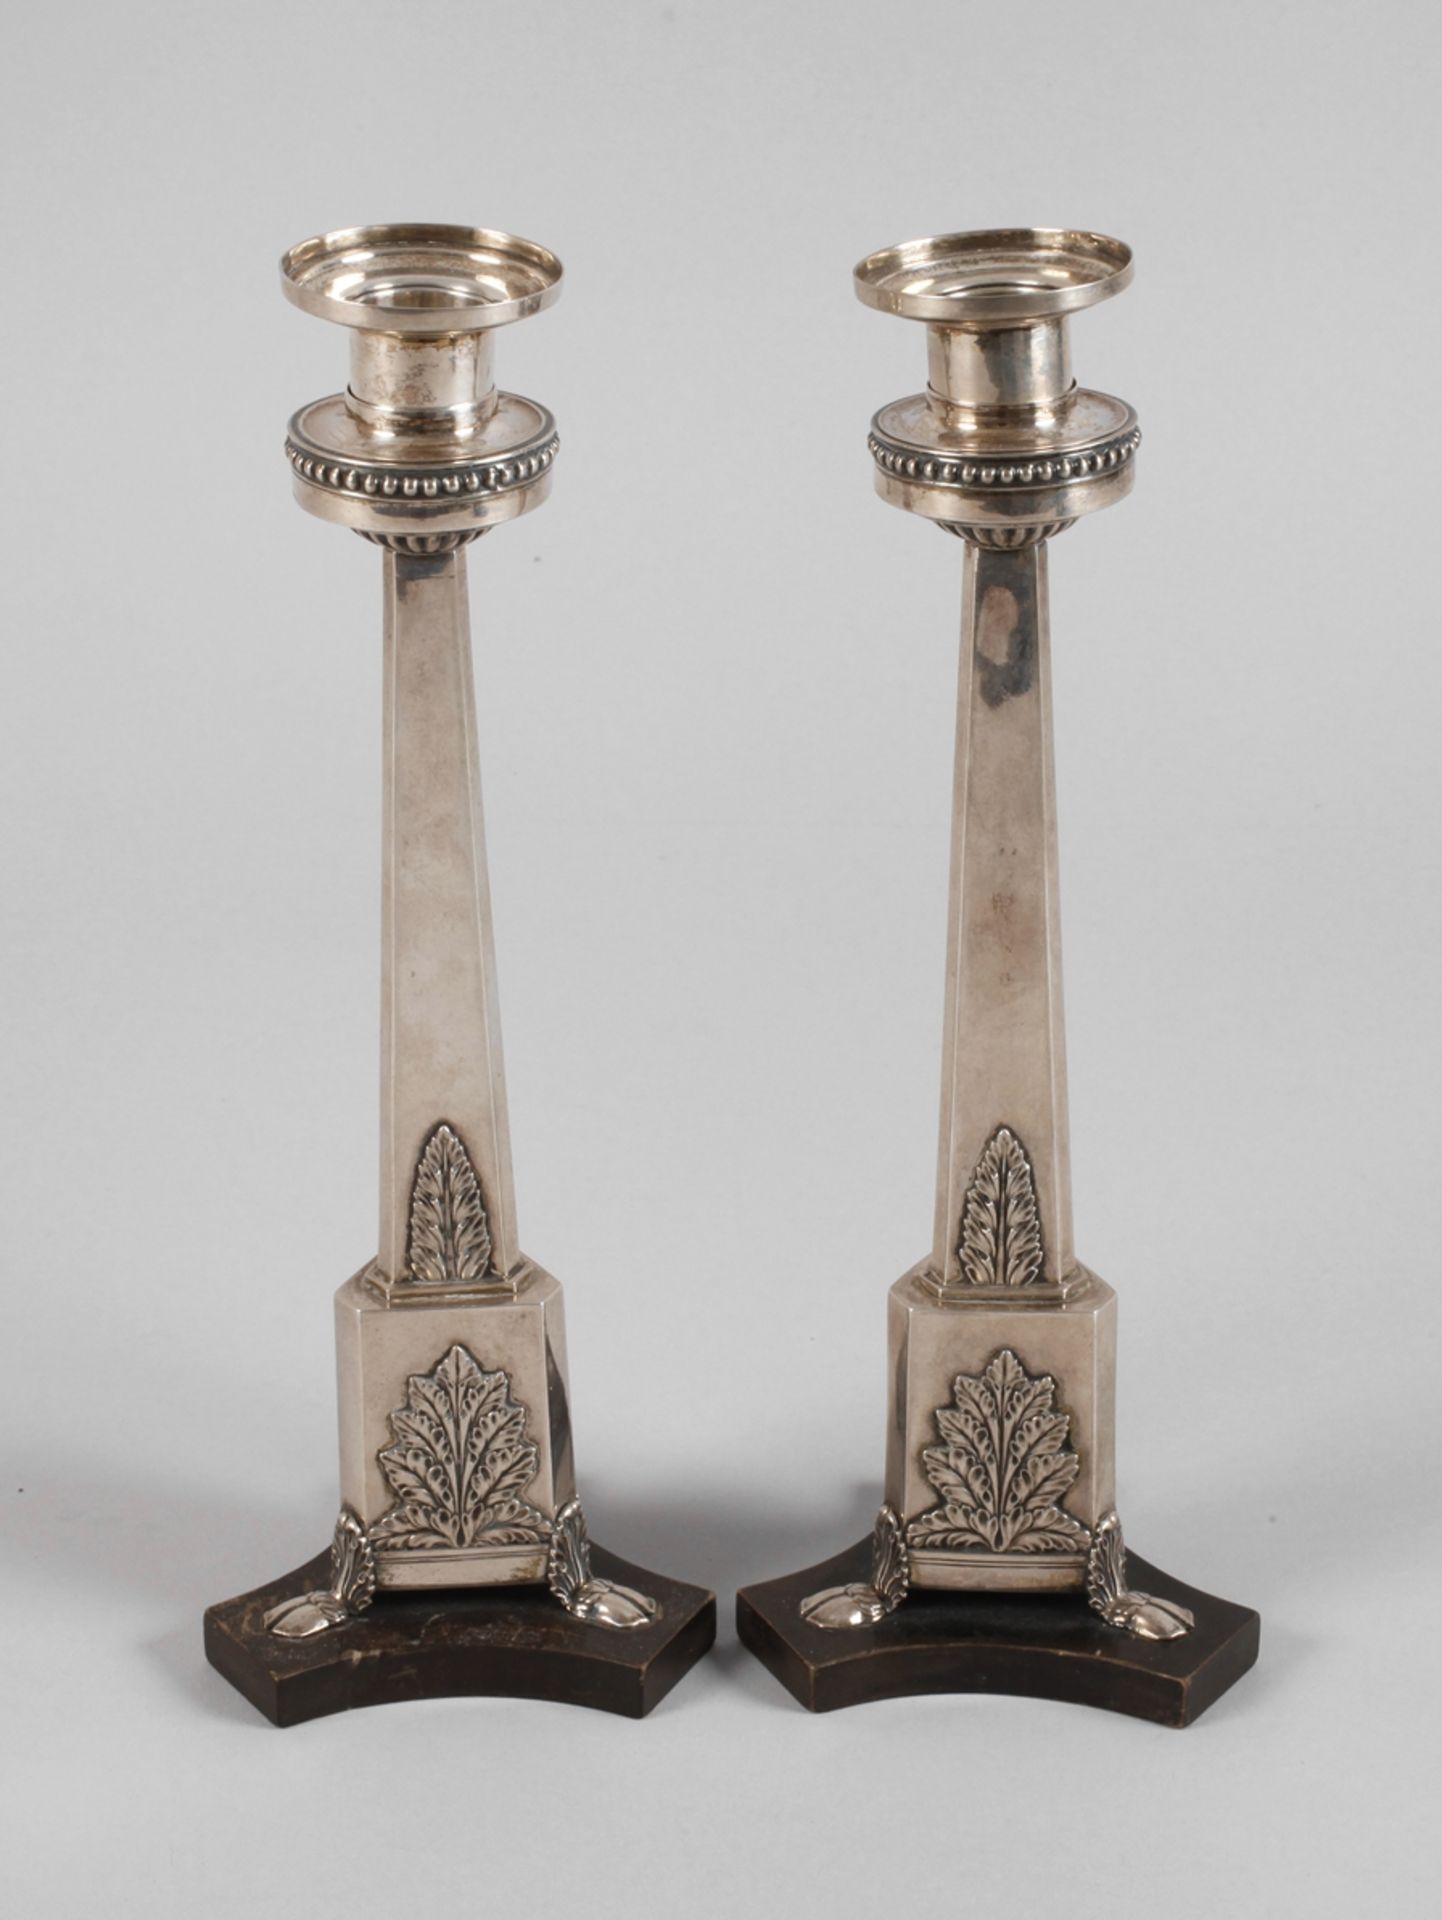 Pair of Empire silver candlesticks